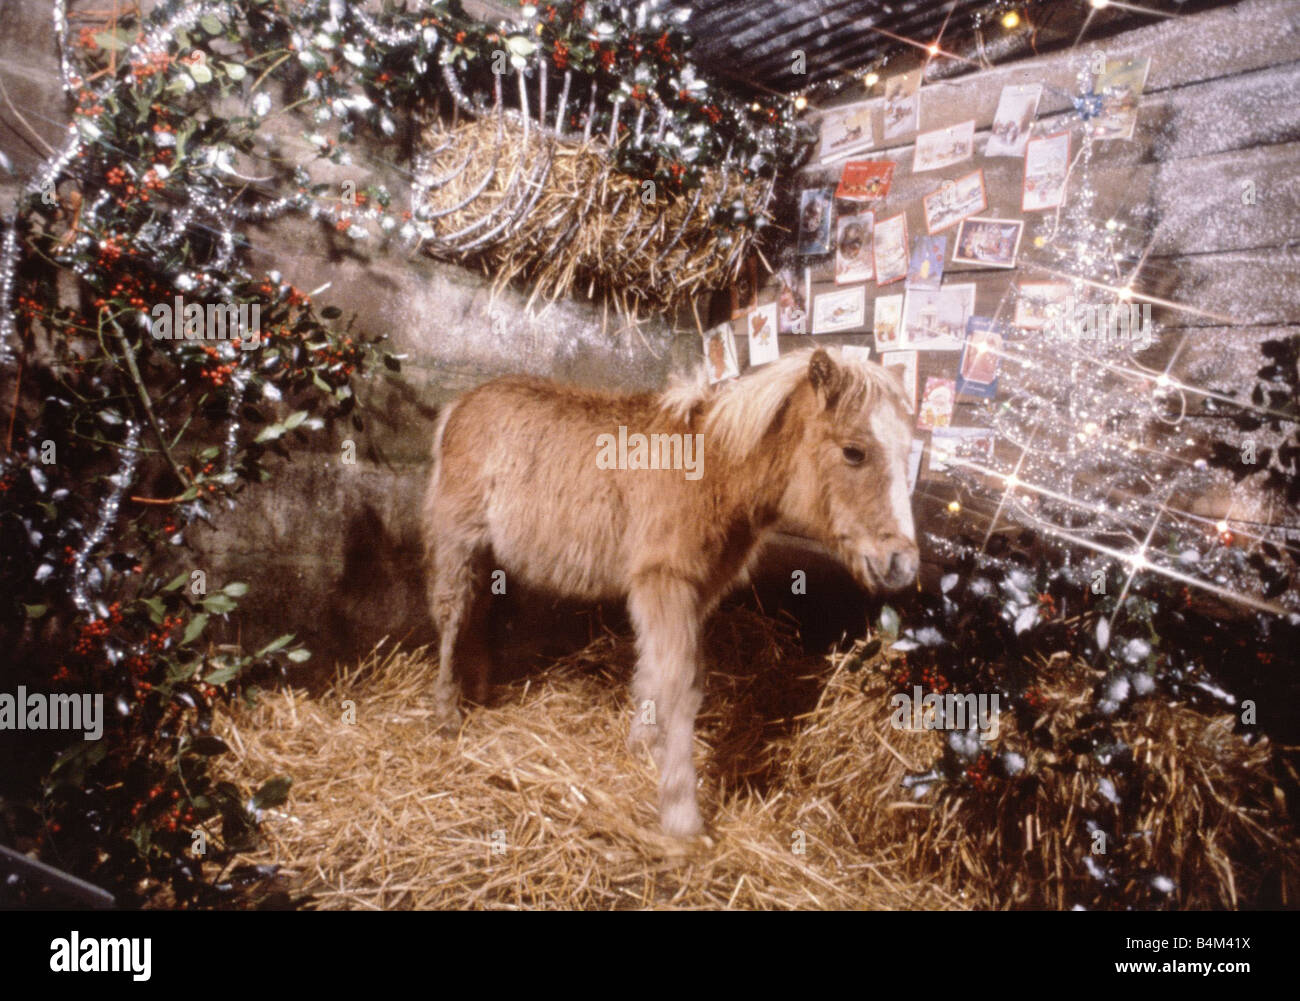 Sunday mirror pony Lucky pictured in a Christmas stable setting December 1982 animal animals horse festive nativity festivals lights Stock Photo